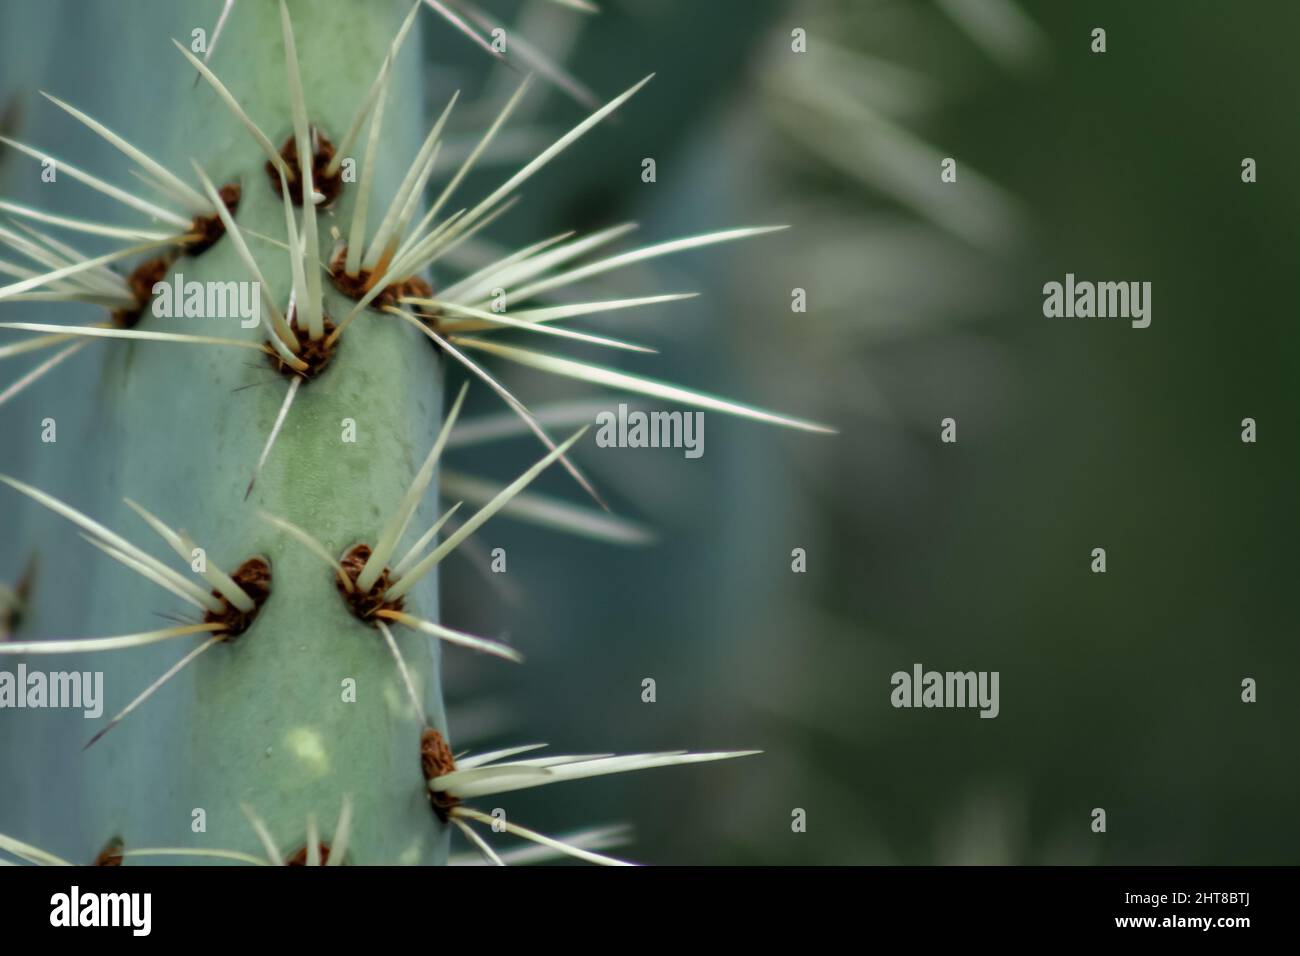 Closeup shot of a prickly pear on the blurry background Stock Photo